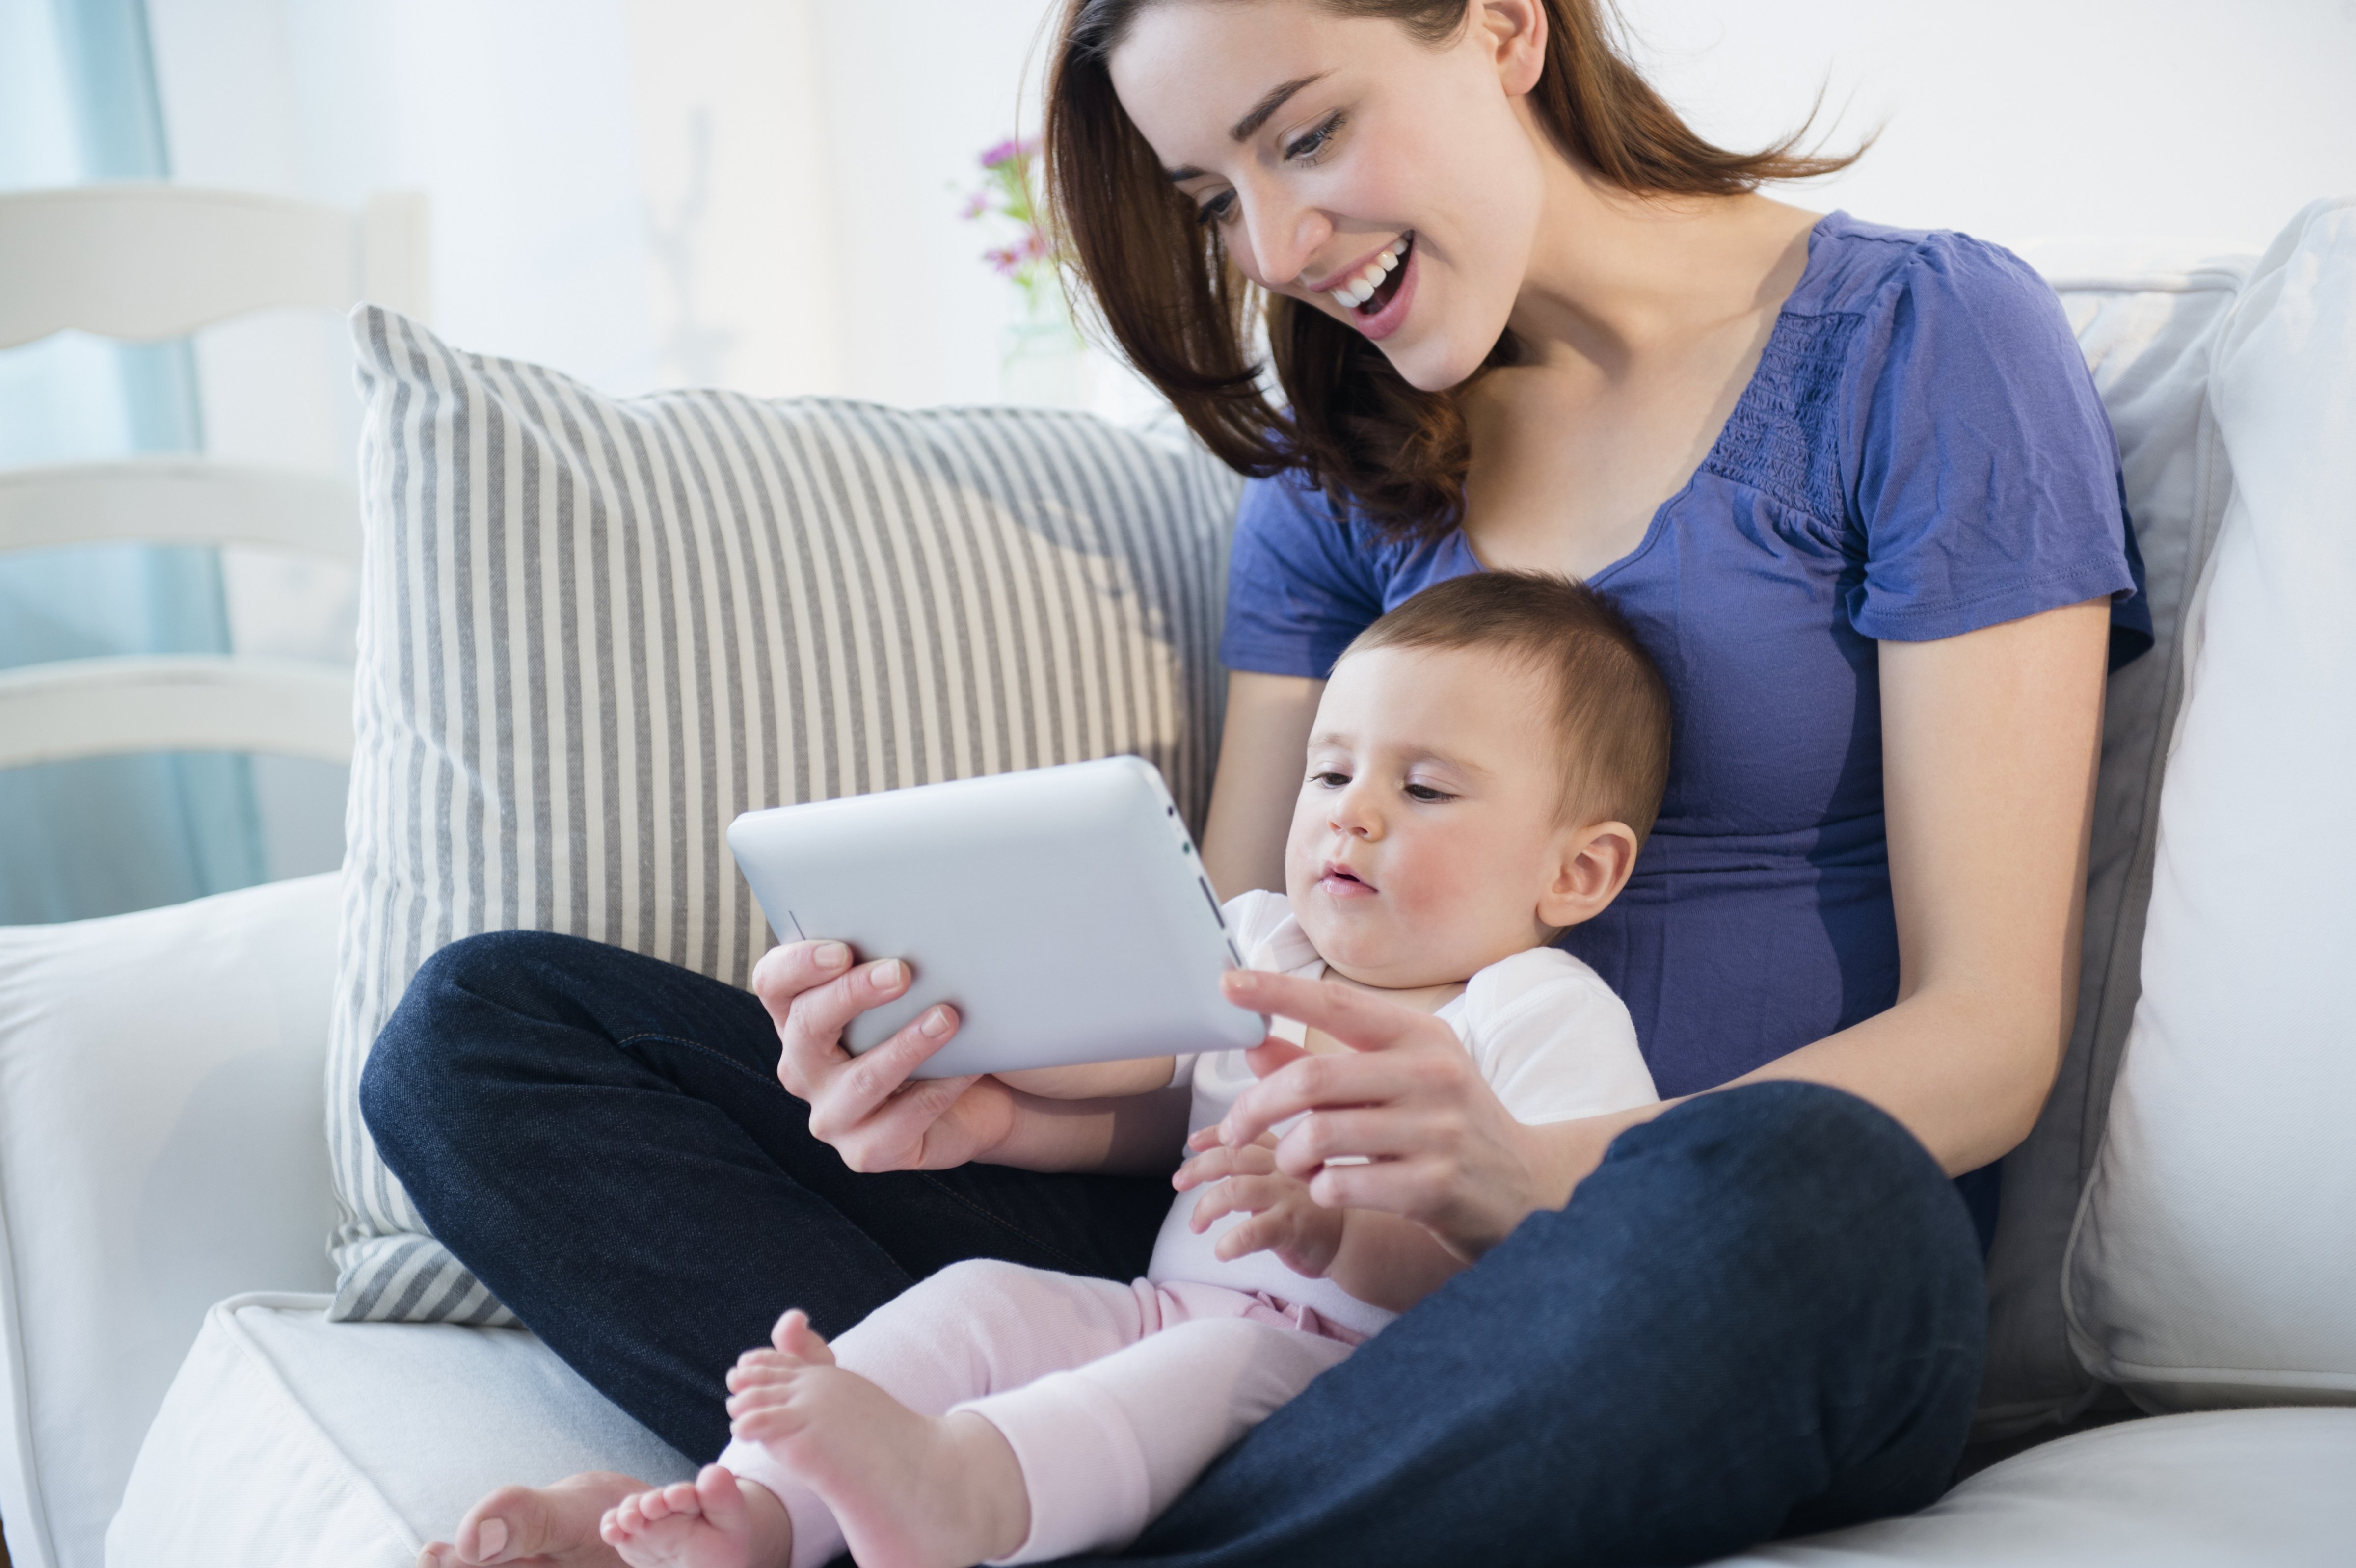 Mother and baby using digital tablet (JGI/Jamie Grill&mdash;Getty Images/Blend Images)